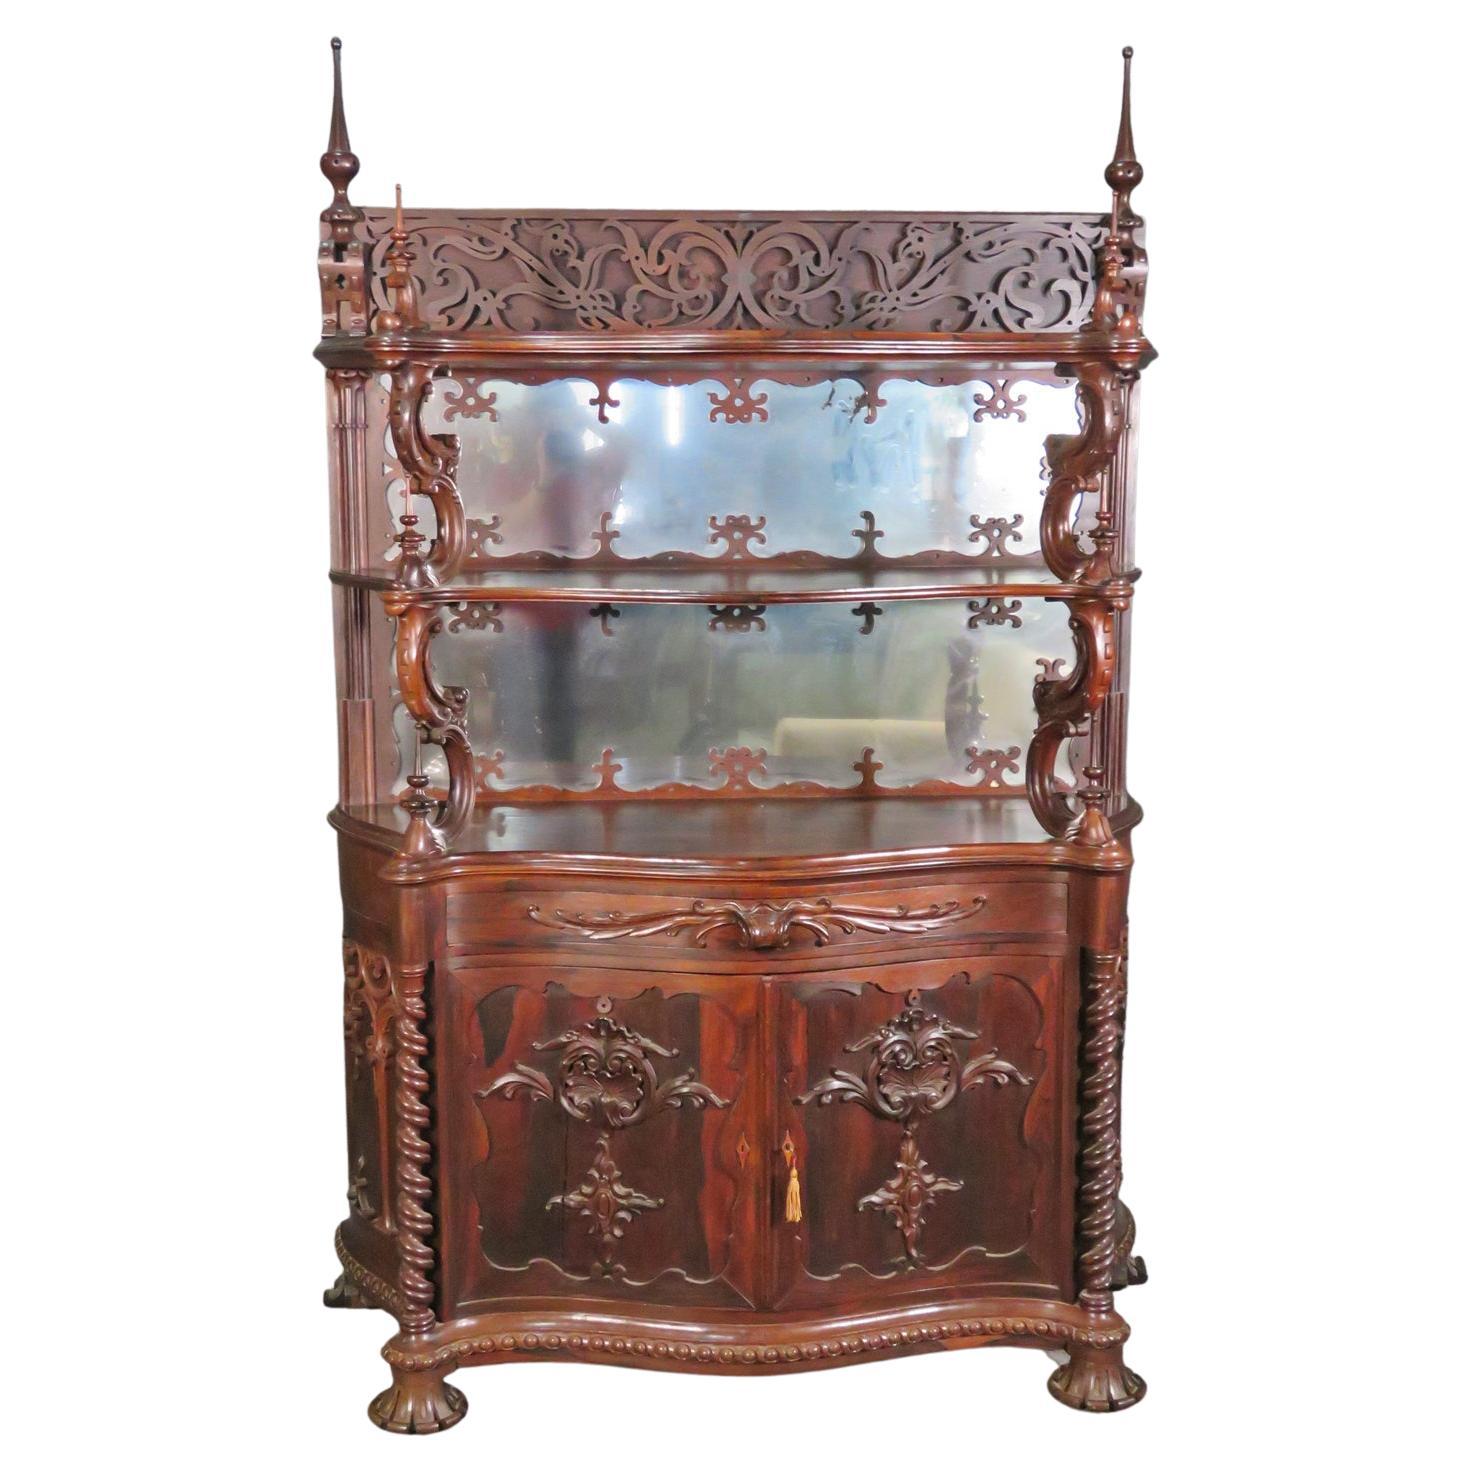 Rare Rosewood American Victorian Etagere Attributed to Alexander Roux C1860s For Sale